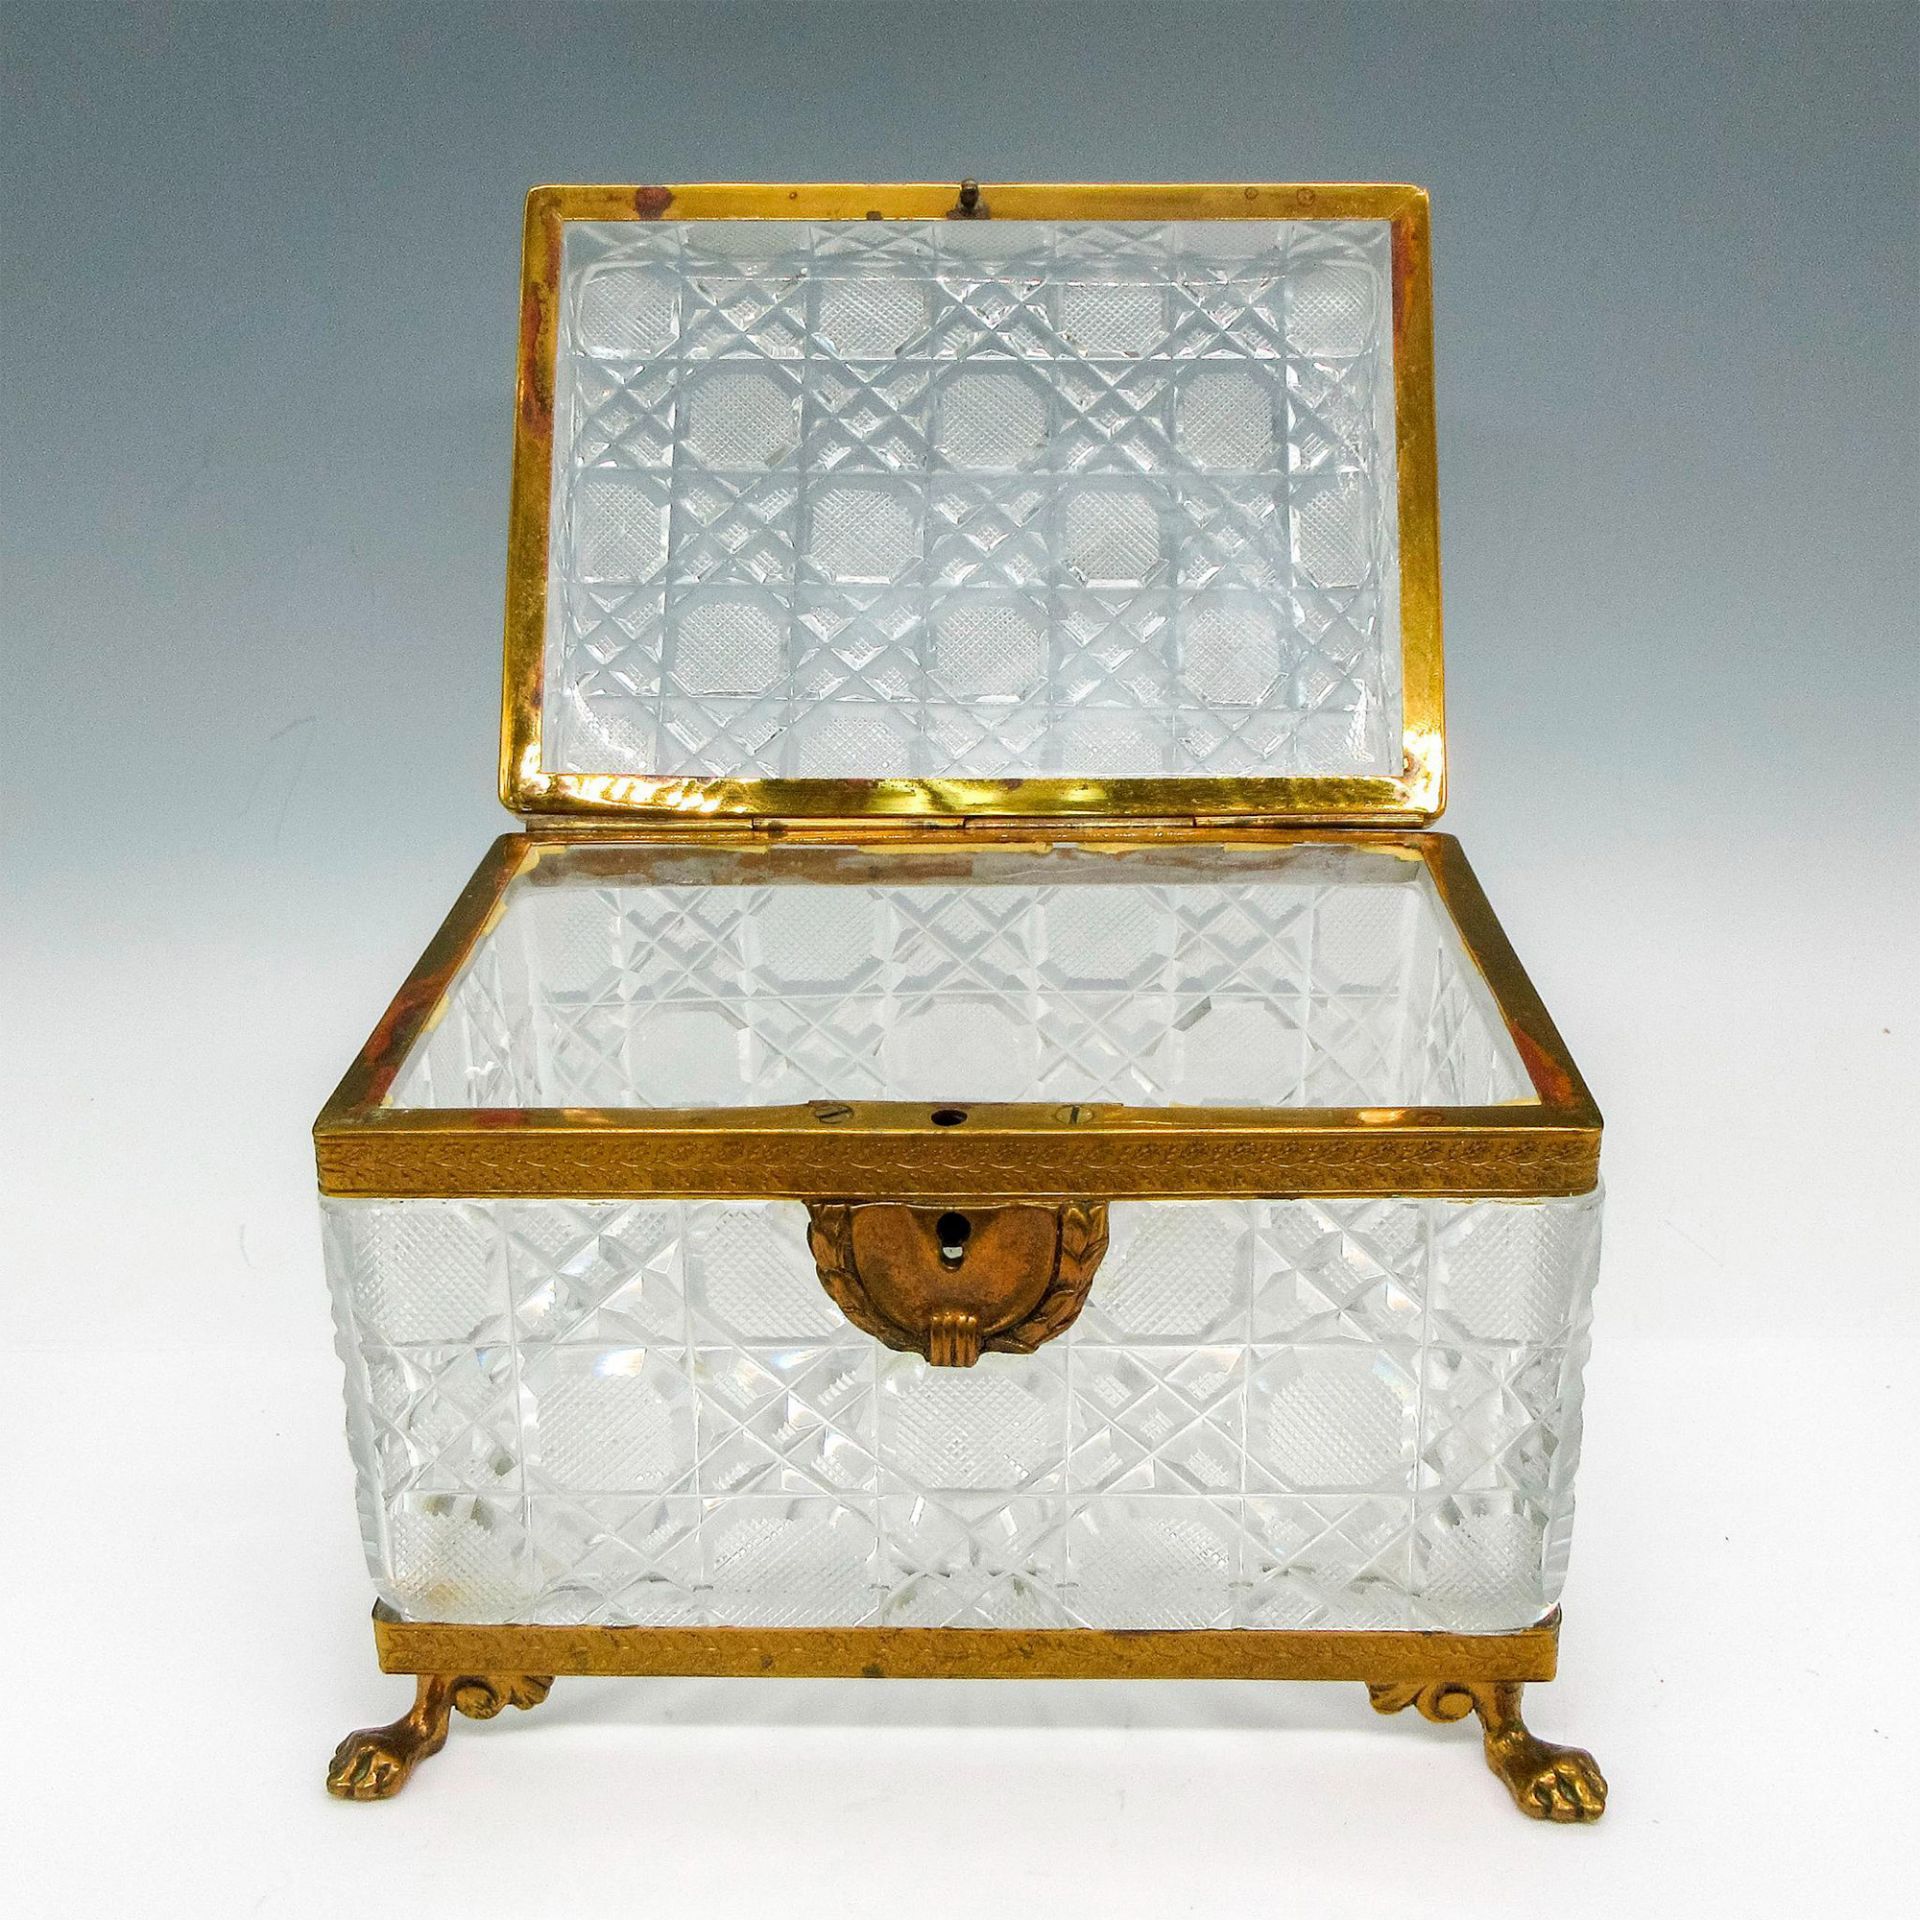 Cut Crystal and Brass Hinged Cigarette Box - Image 2 of 4